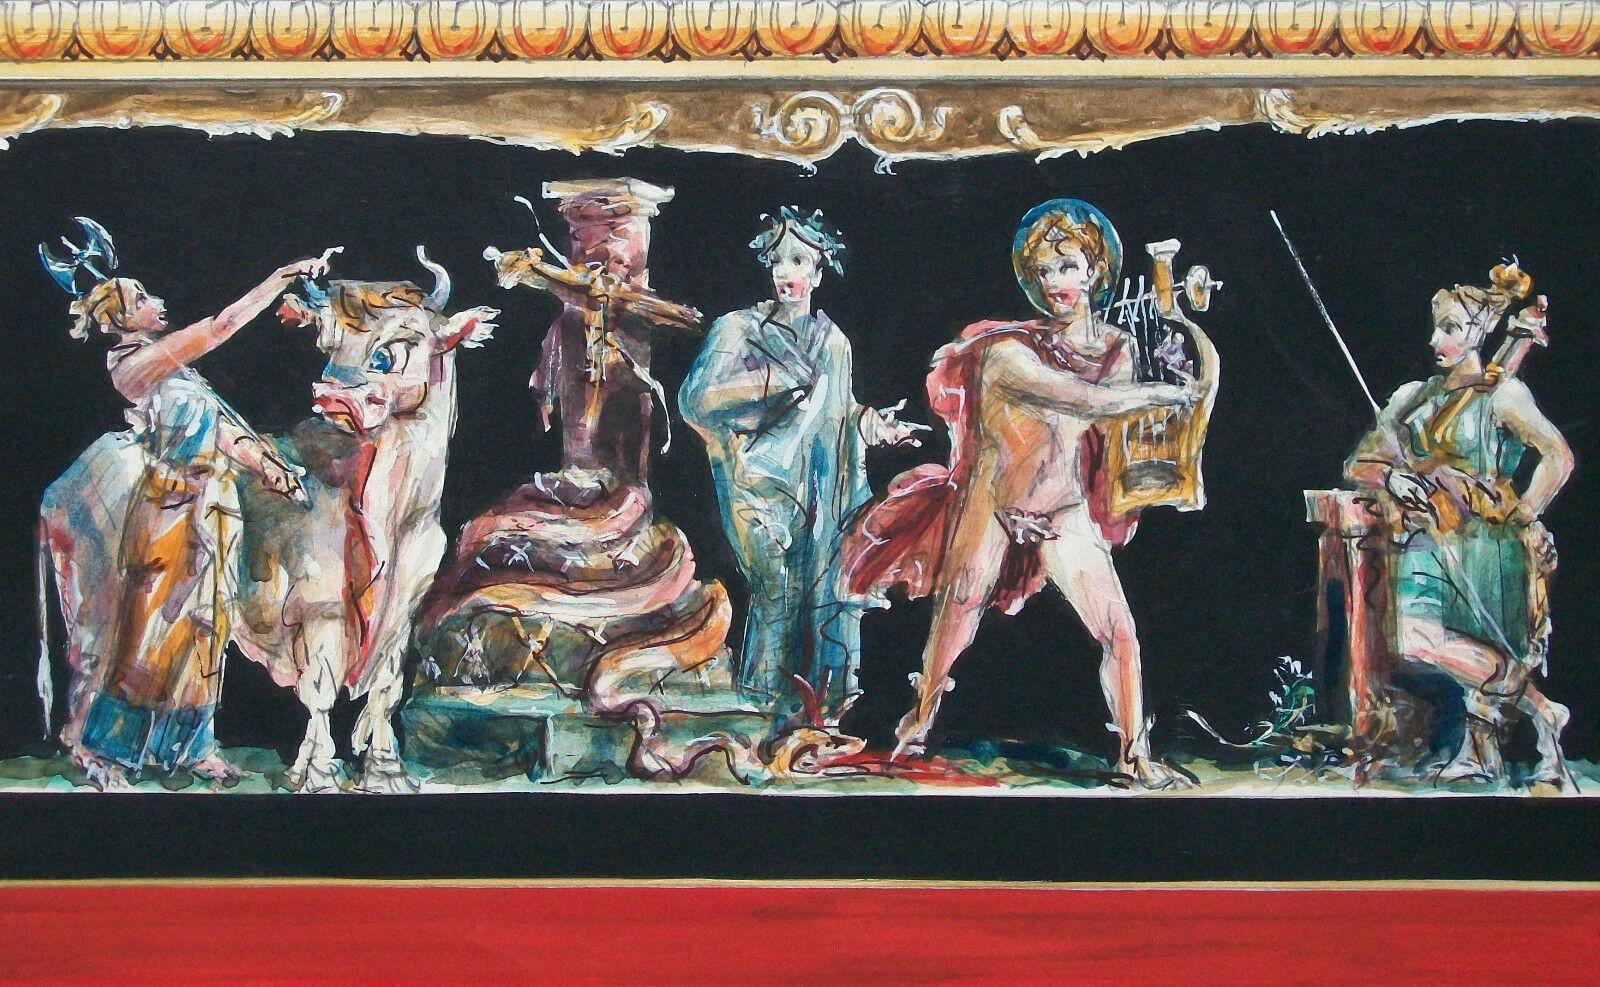 ANTONIO FRANCIONE (1907 -1987 - Italy) - 'Pompeii' - Fine quality frieze style painting - watercolor and gouache over graphite on paper - extraordinary quality and composition - signed by the artist in pencil lower right - titled lower left -